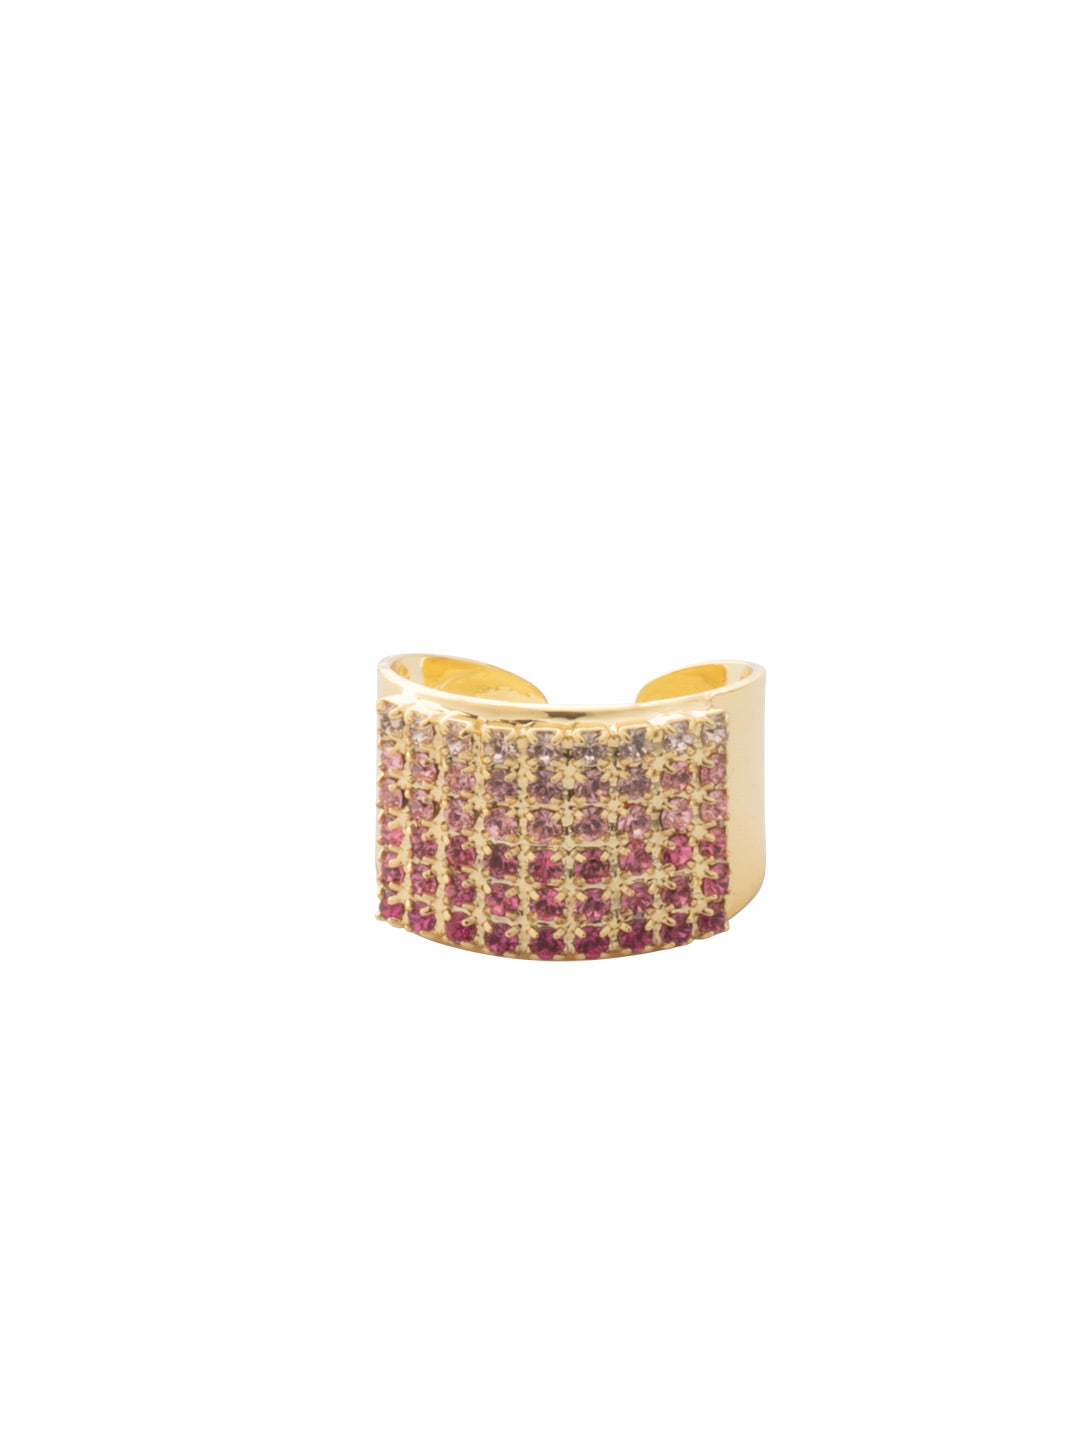 Product Image: Mini Crystal Pave Cocktail Ring